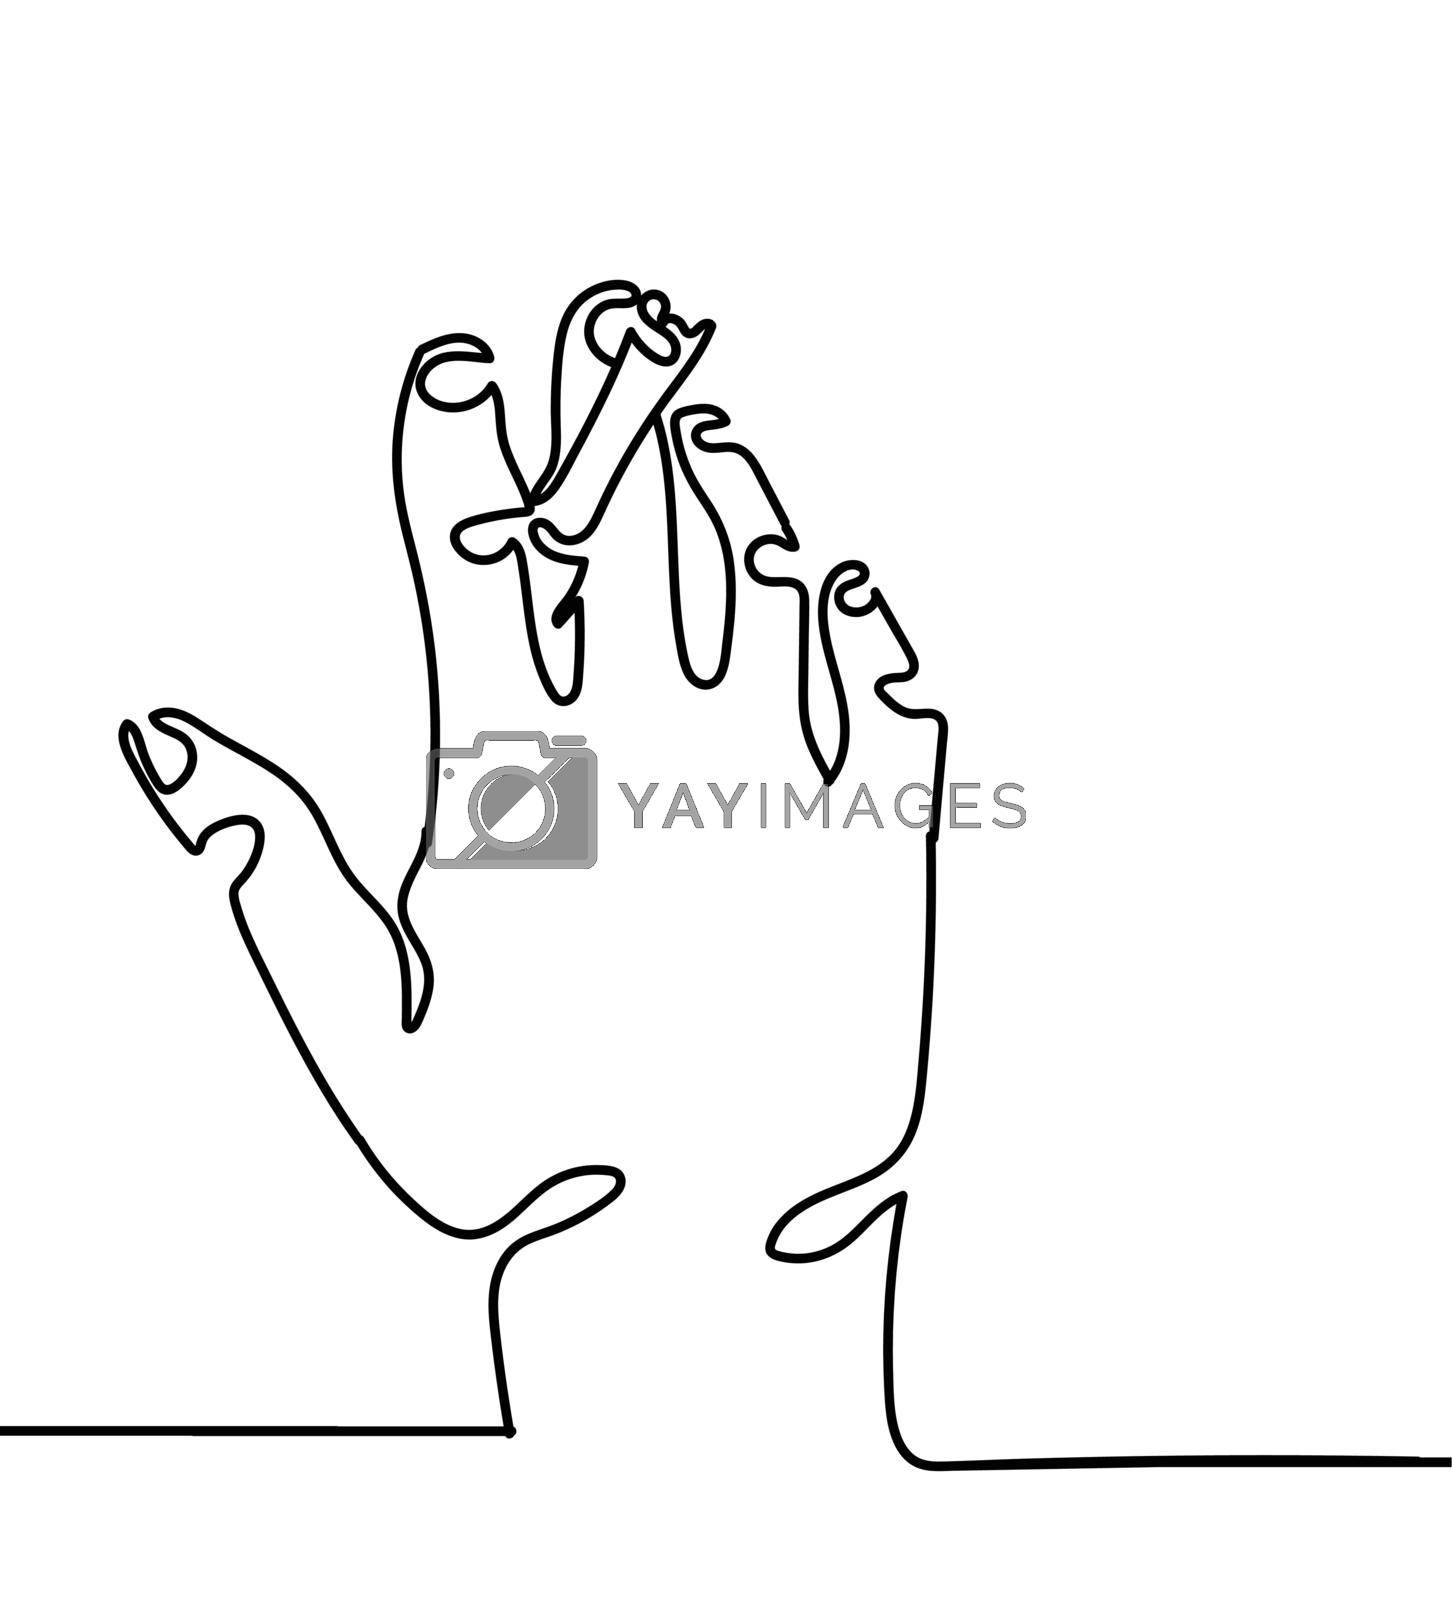 Royalty free image of one line hand with Cigarette by focus_bell